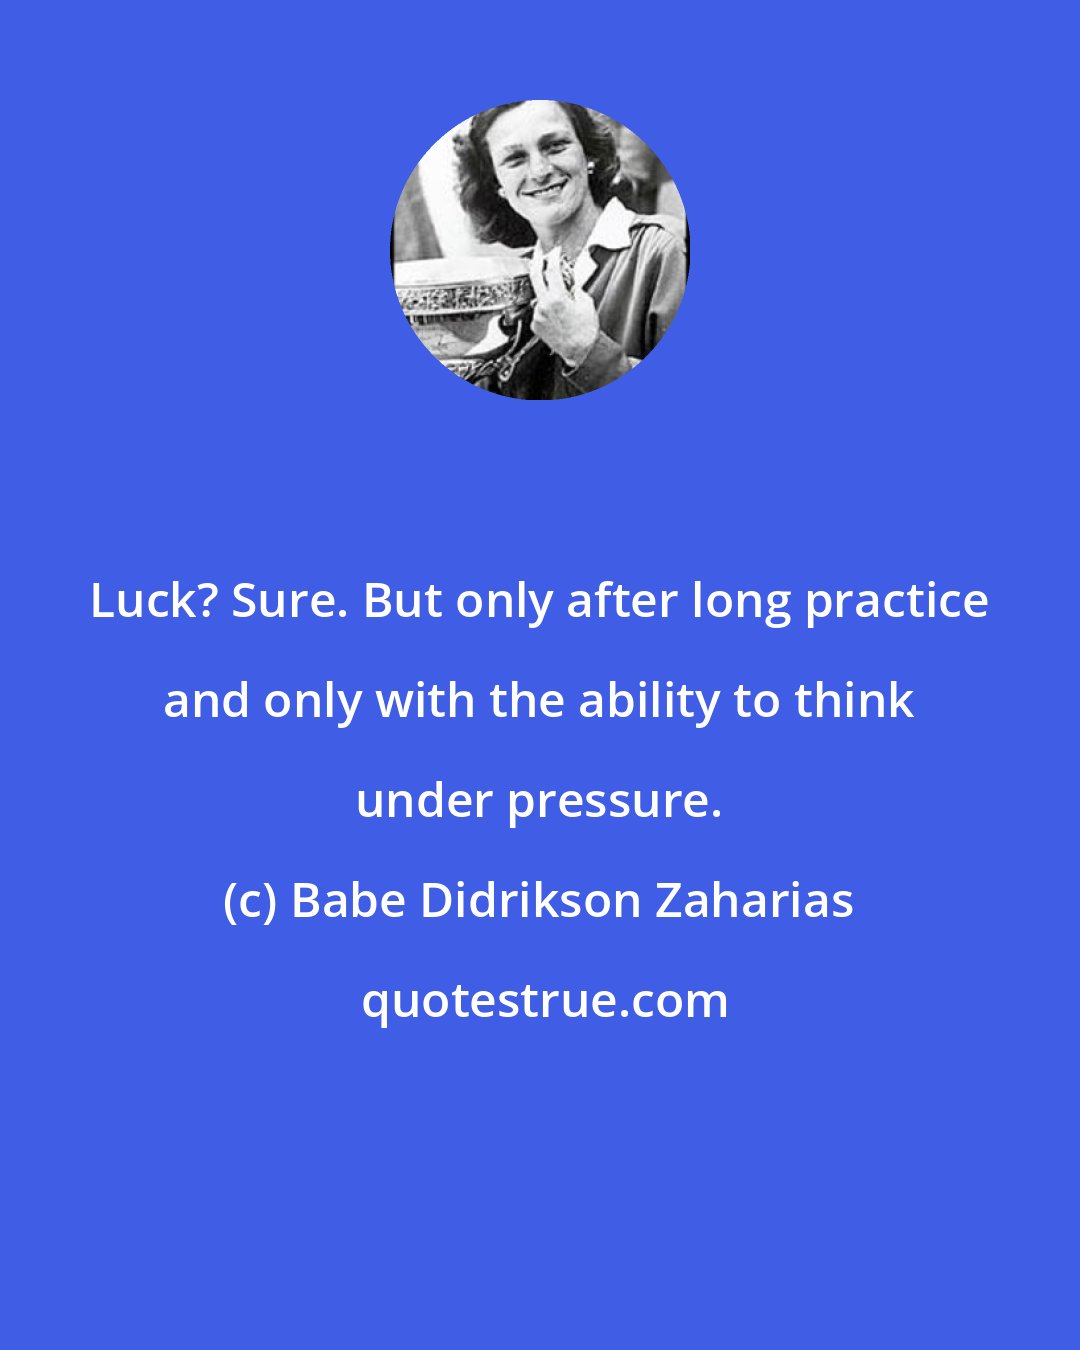 Babe Didrikson Zaharias: Luck? Sure. But only after long practice and only with the ability to think under pressure.